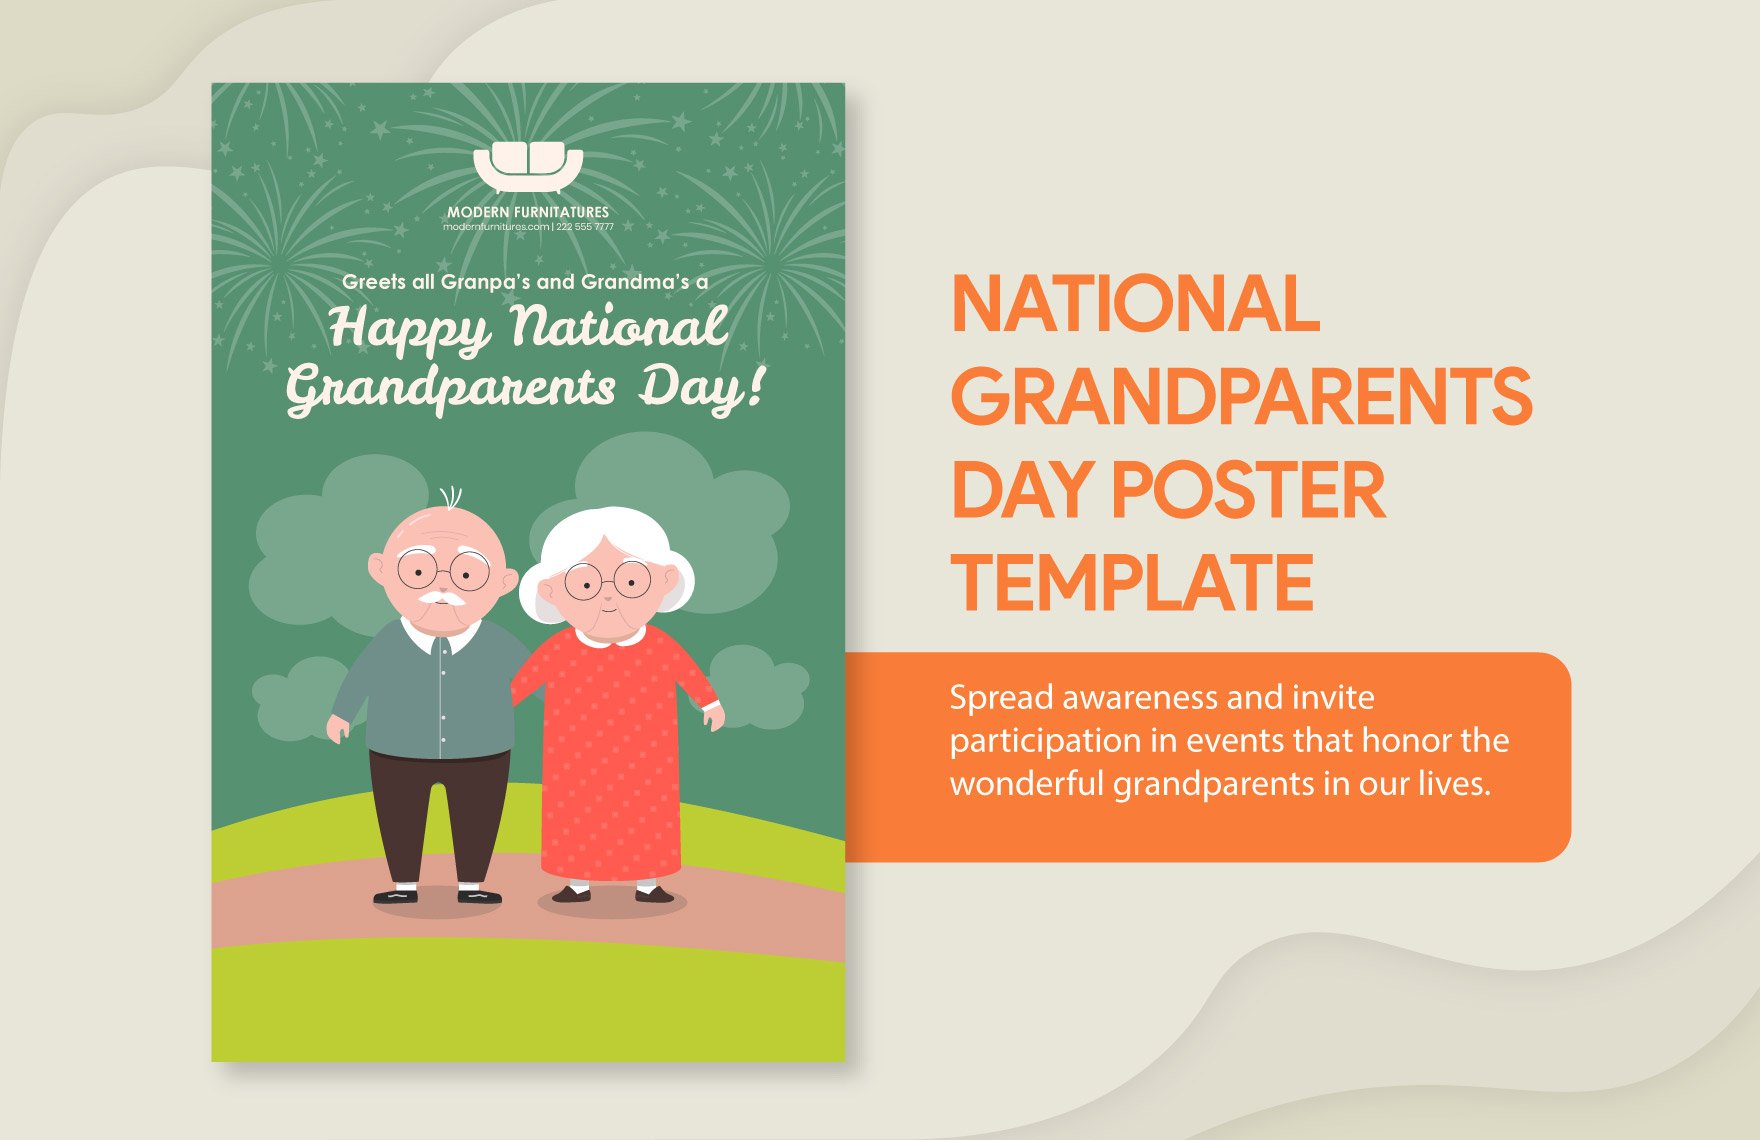 National Grandparents Day Poster Template